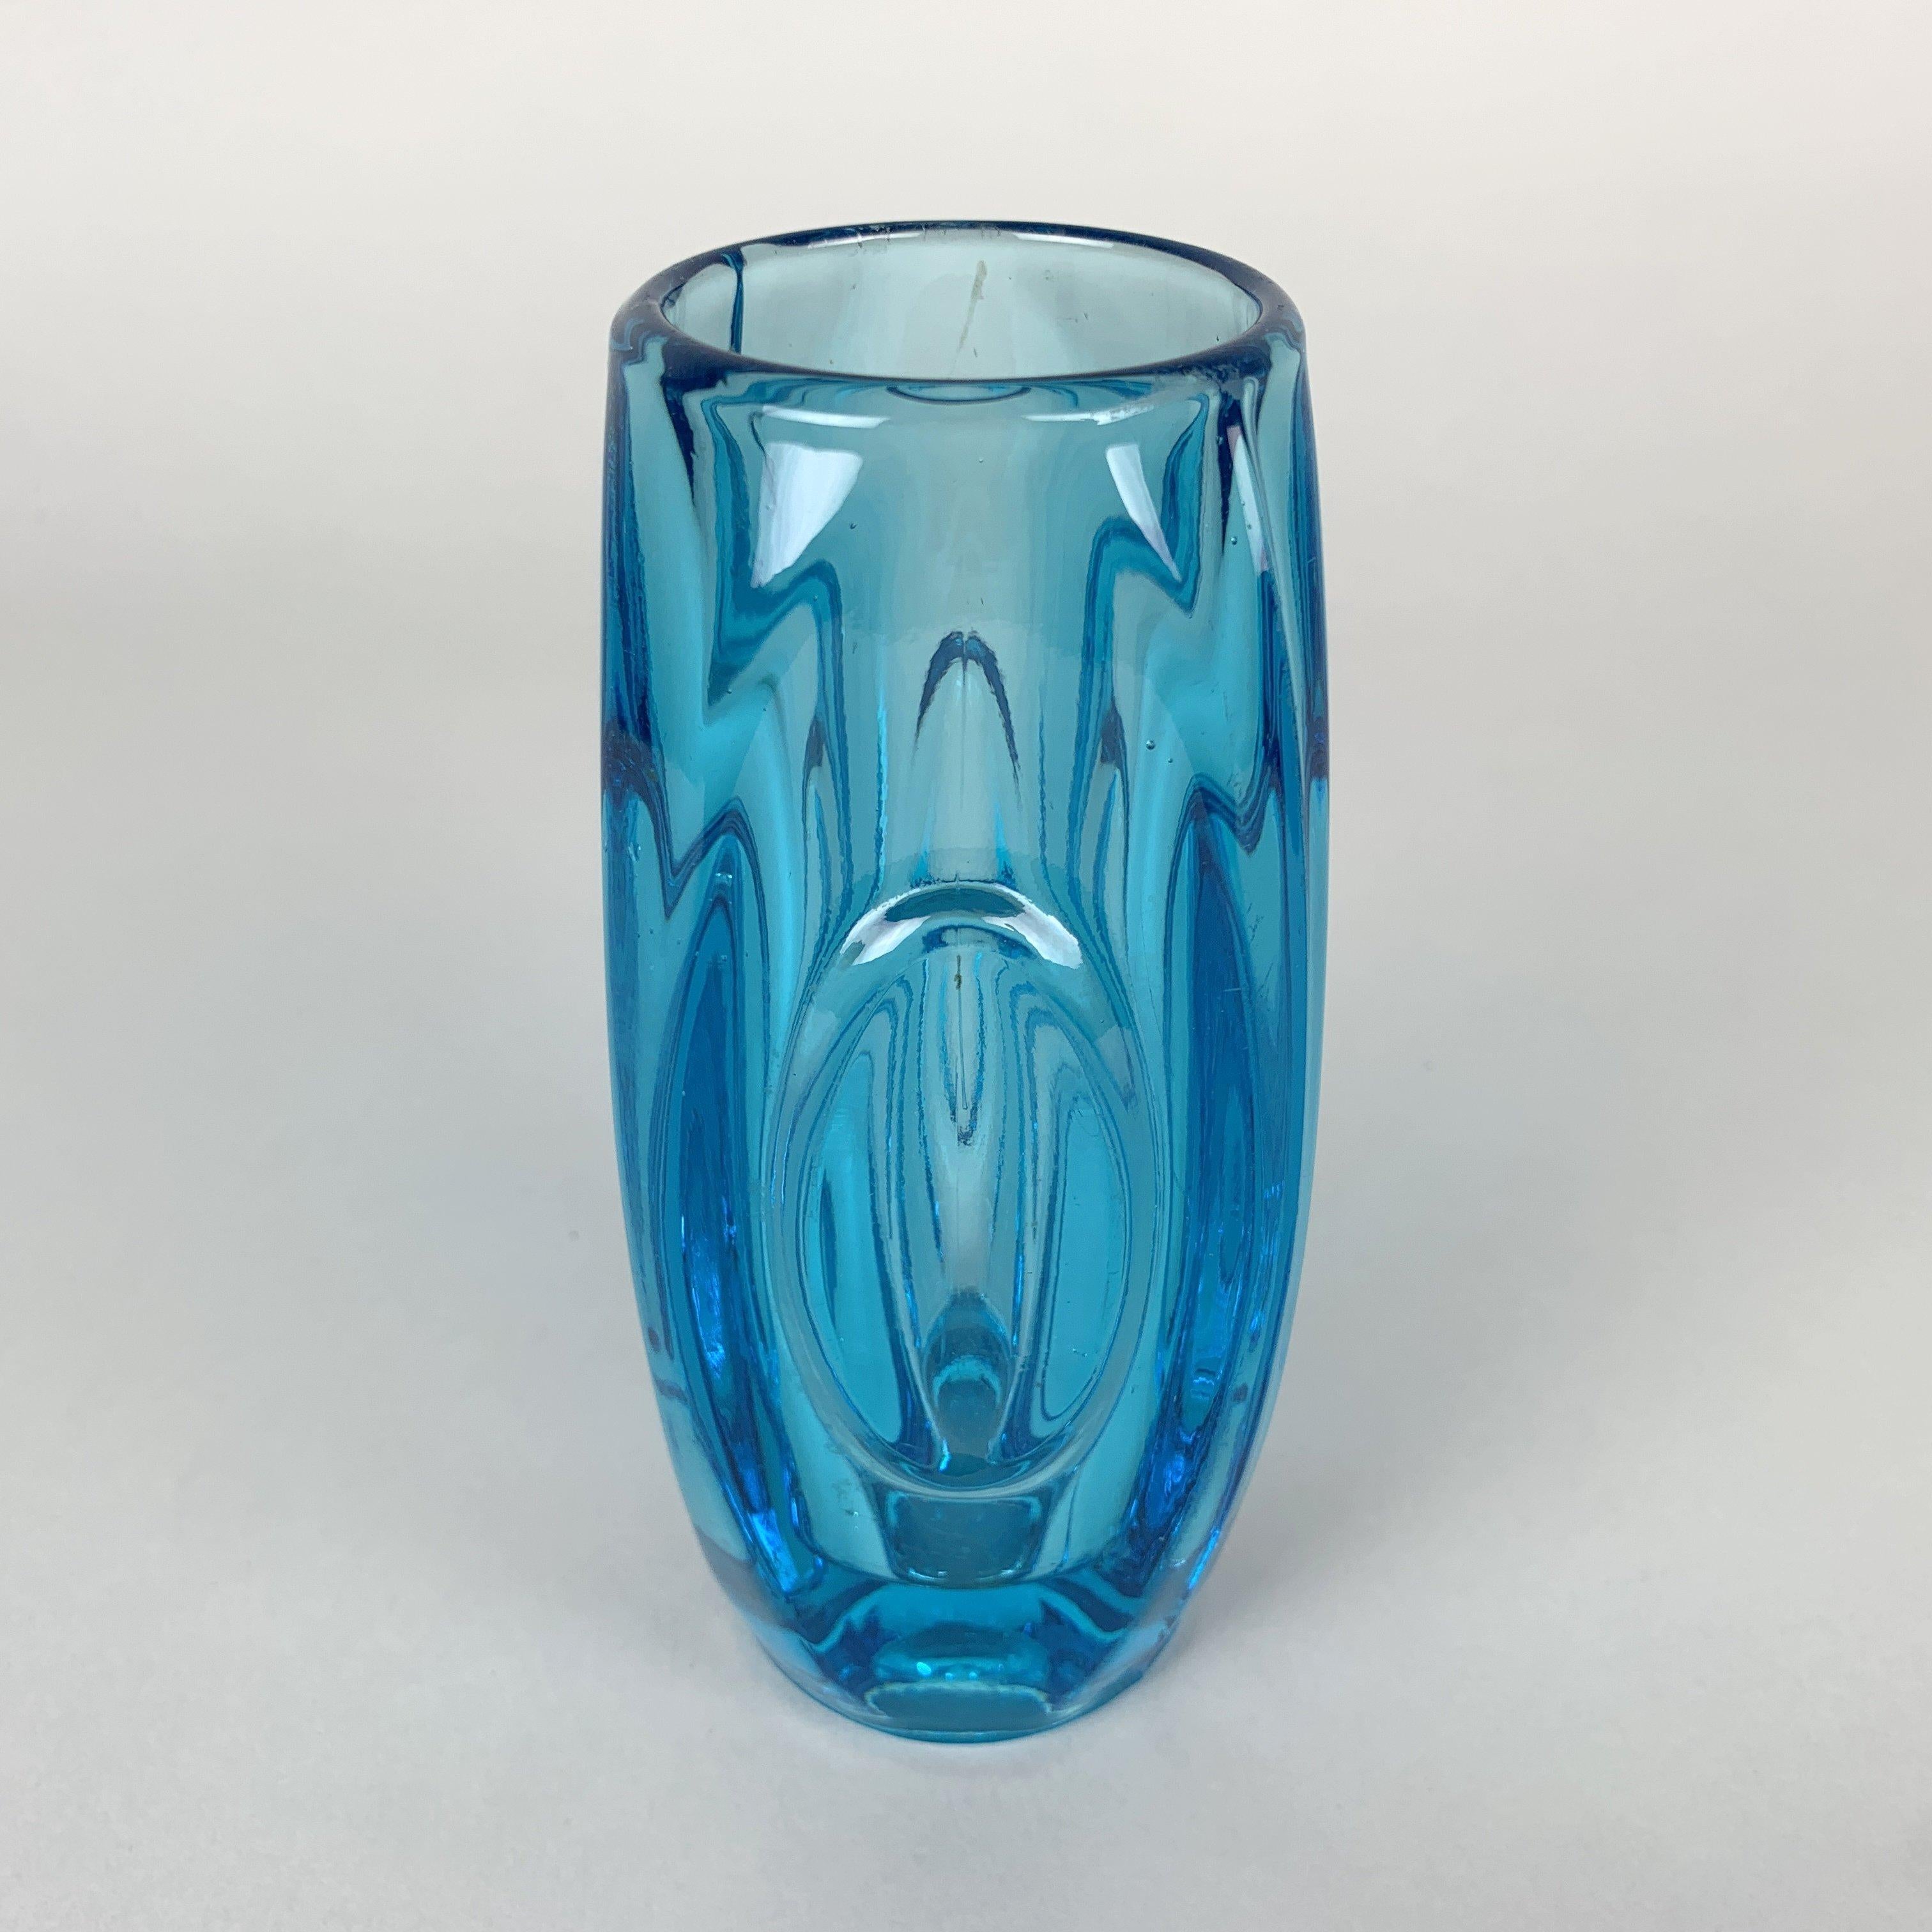 Small blue vase made of pressed glass designed by Rudolf Schrötter in circa 1955 and manufactured by Rosice Glassworks (part of the Sklo Union) in former Czechoslovakia.